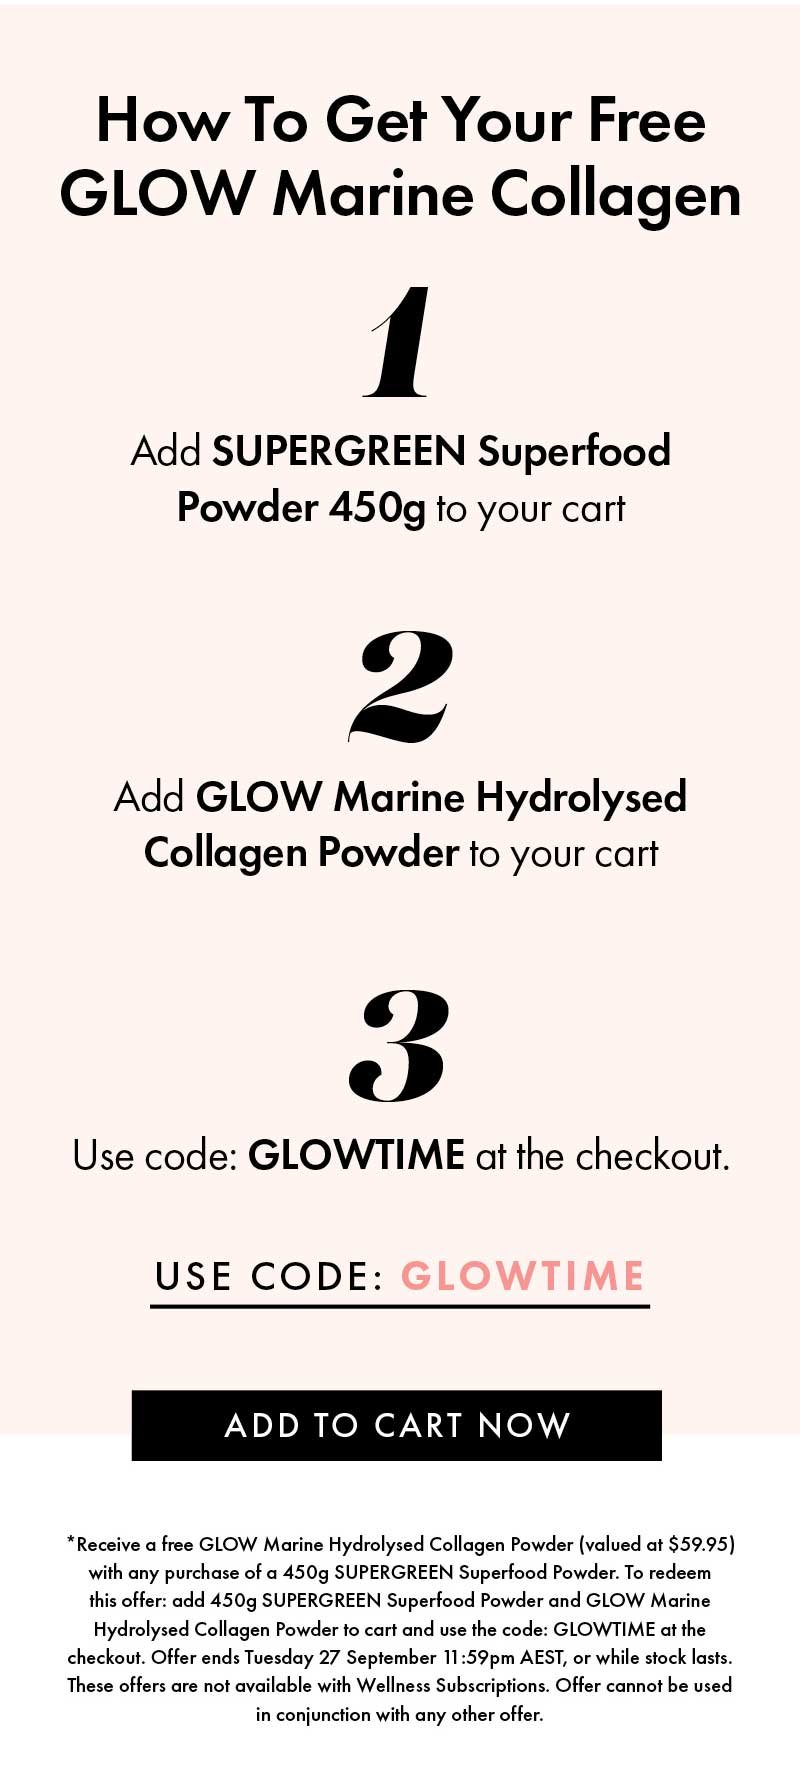 How To Get Your Free GLOW Marine Collagen